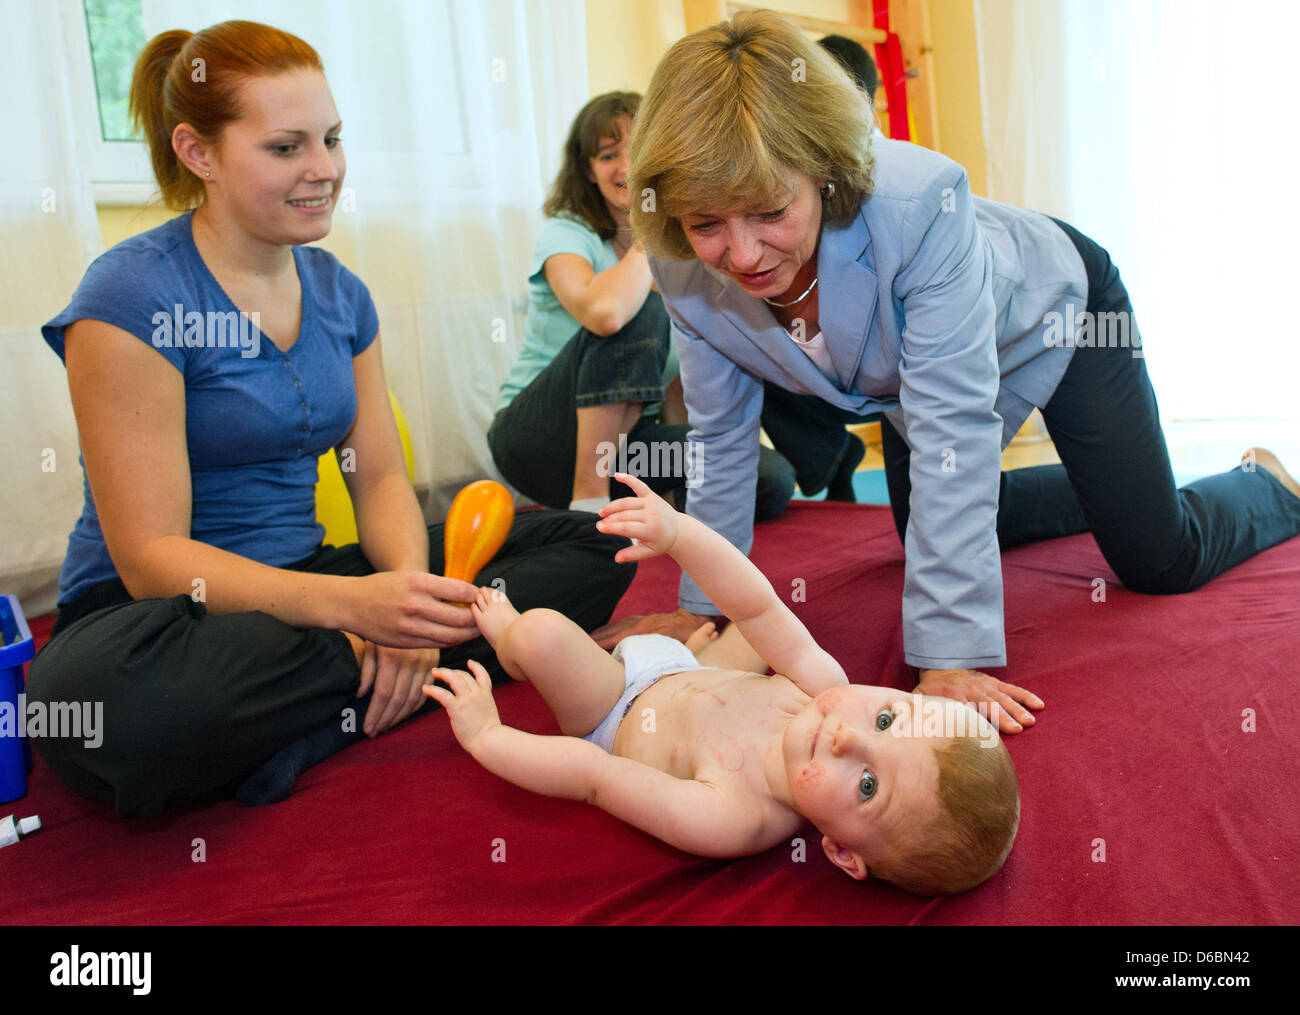 Partner of the German President, Daniela Schadt (front), plays with nine-month-old Lara Hohmann while physiotherapist Svenja Dudek (L) and mother Sieglinde Hohmann are watching them at the after-care hospital for children Berlin-Brandenburg in Bernau, Germany, 03 September 2012. The little girl suffered from a hole in the cardiac septum and now is recovering from the surgery. Danie Stock Photo